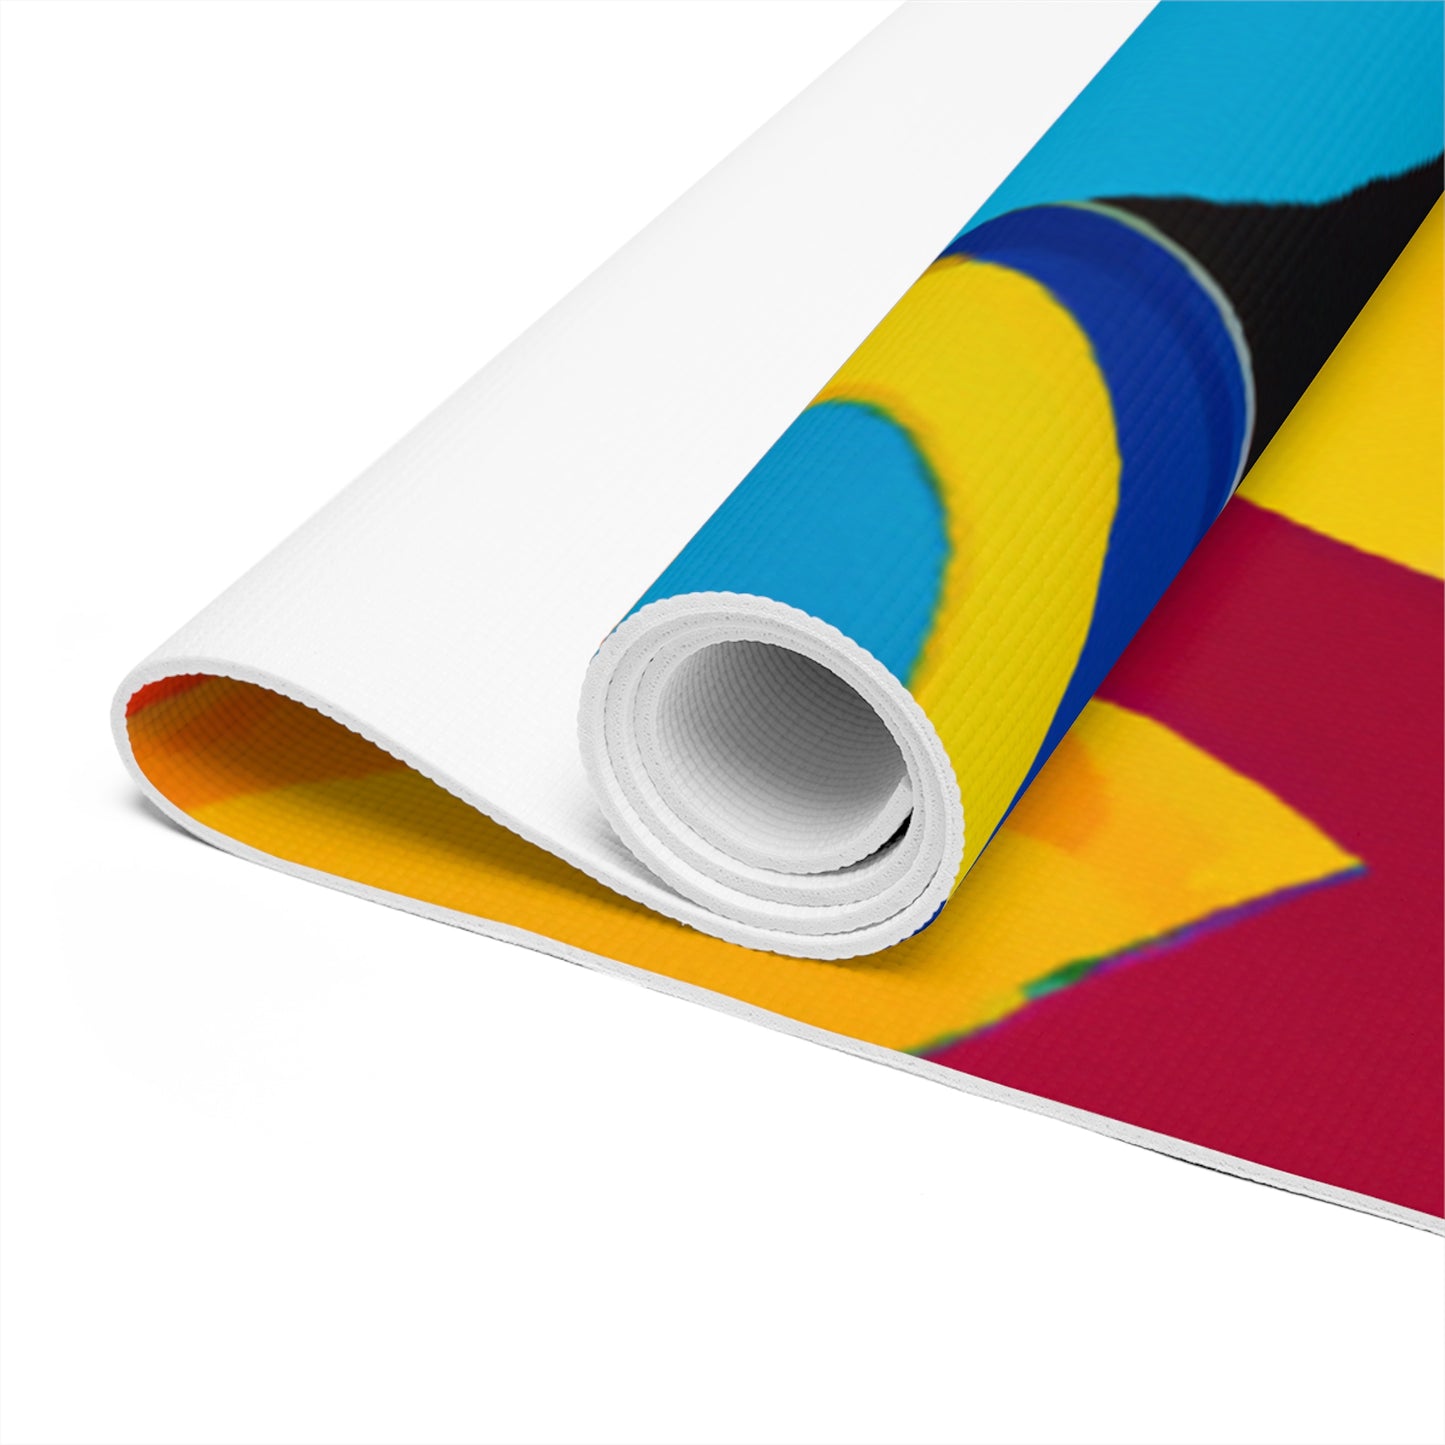 "Dynamic Sportscape: A Colorful Abstract Journey" - Go Plus Foam Yoga Mat